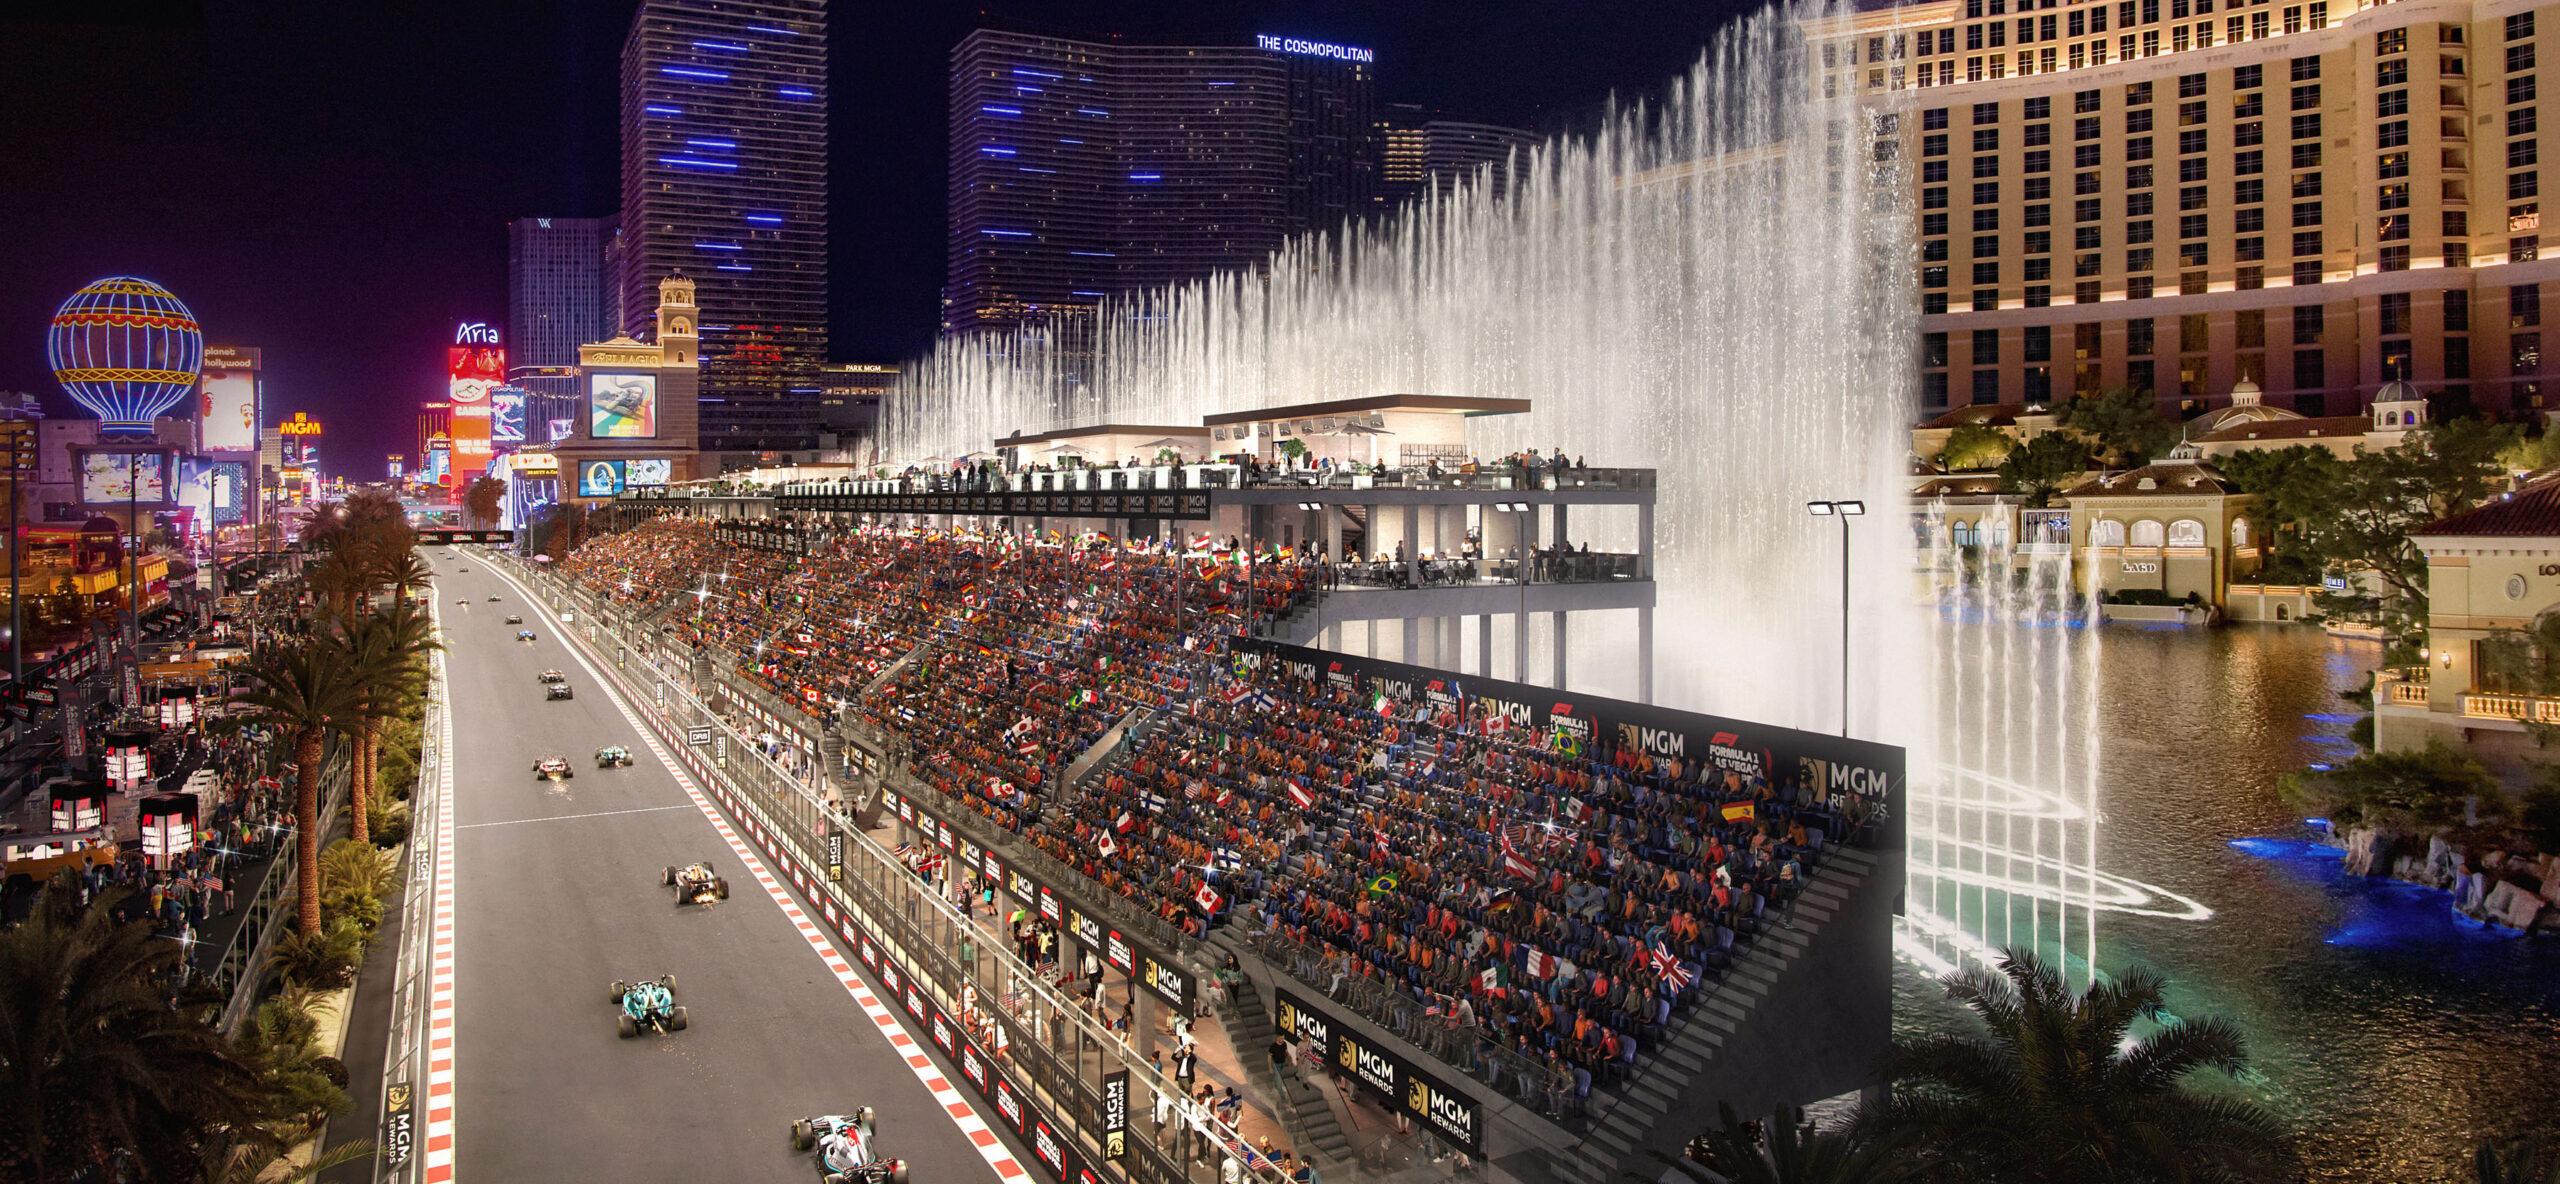 Is F1 Las Vegas Living Up To The Hype?